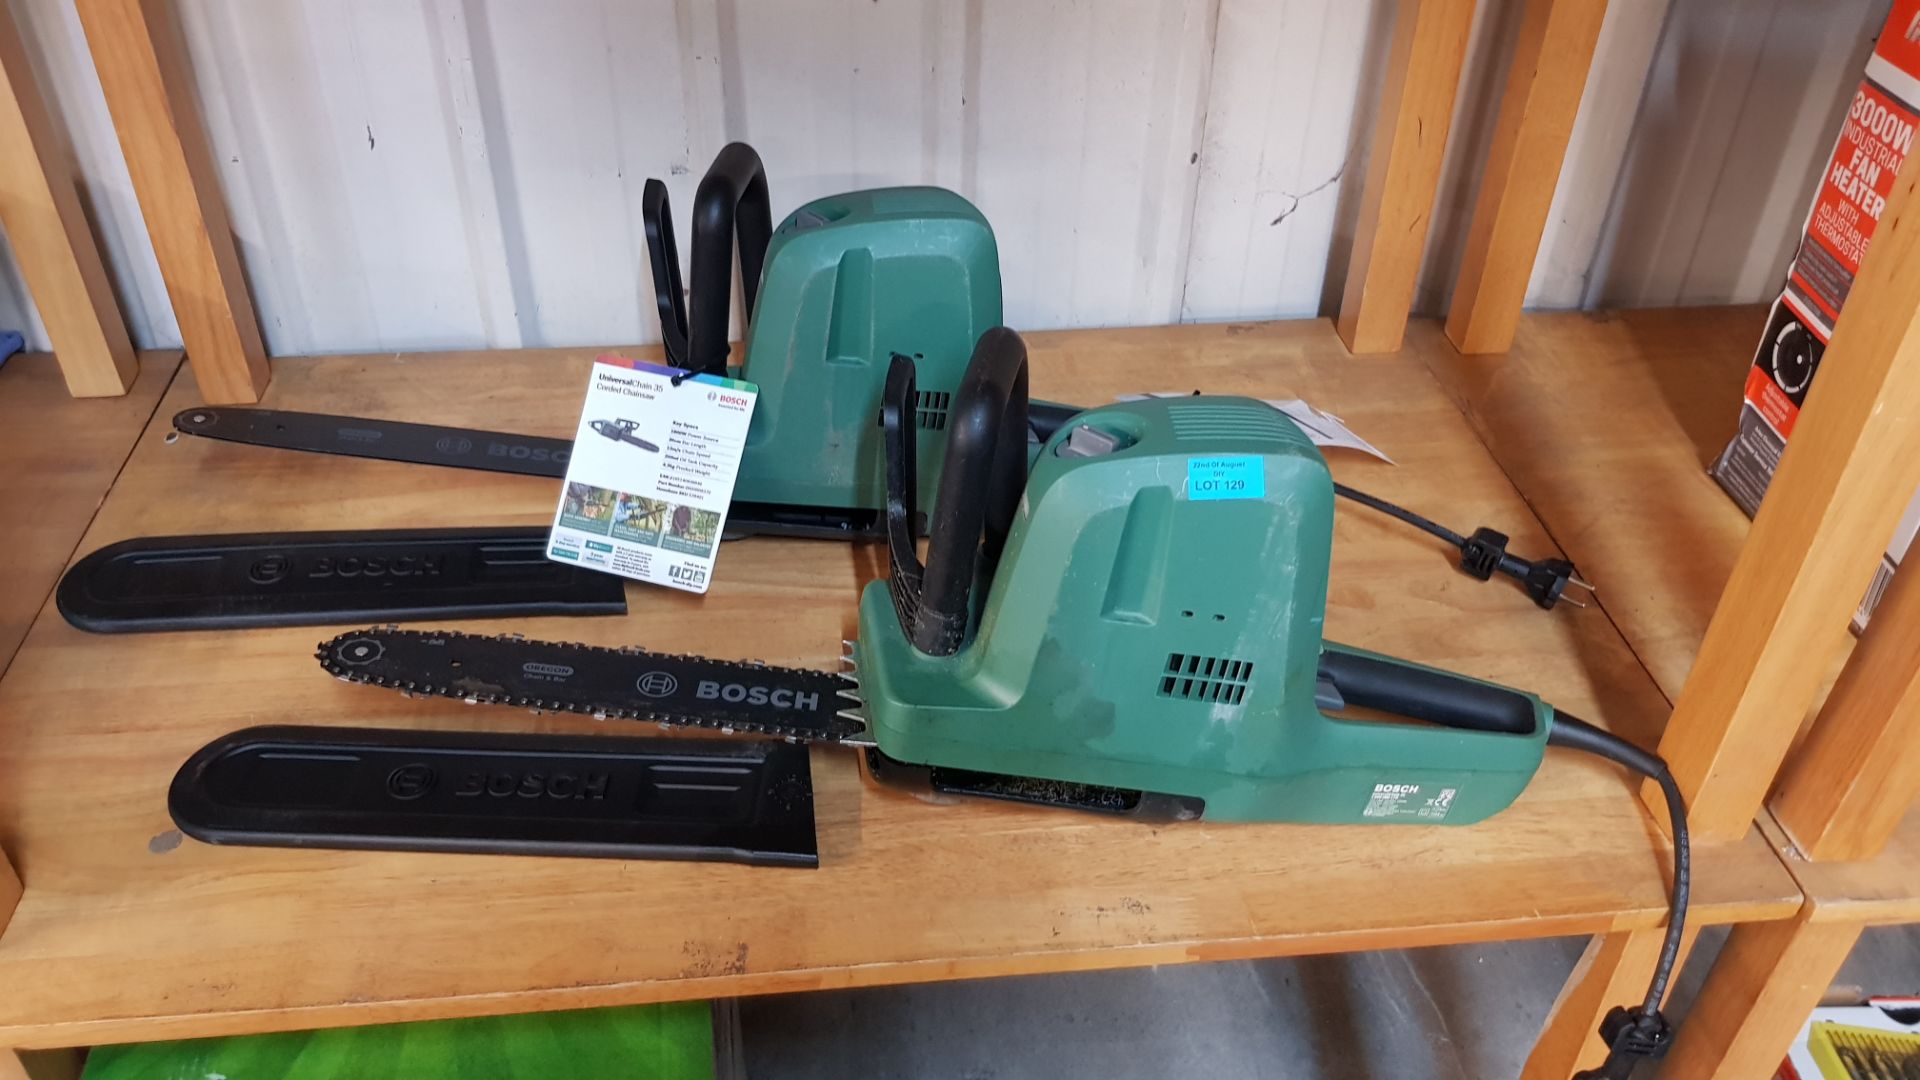 (R14C) 2x Bosch Universal Chainsaw 35. (1x Ex Display, Clean. Appears As New. No Chain On This Unit - Image 3 of 3